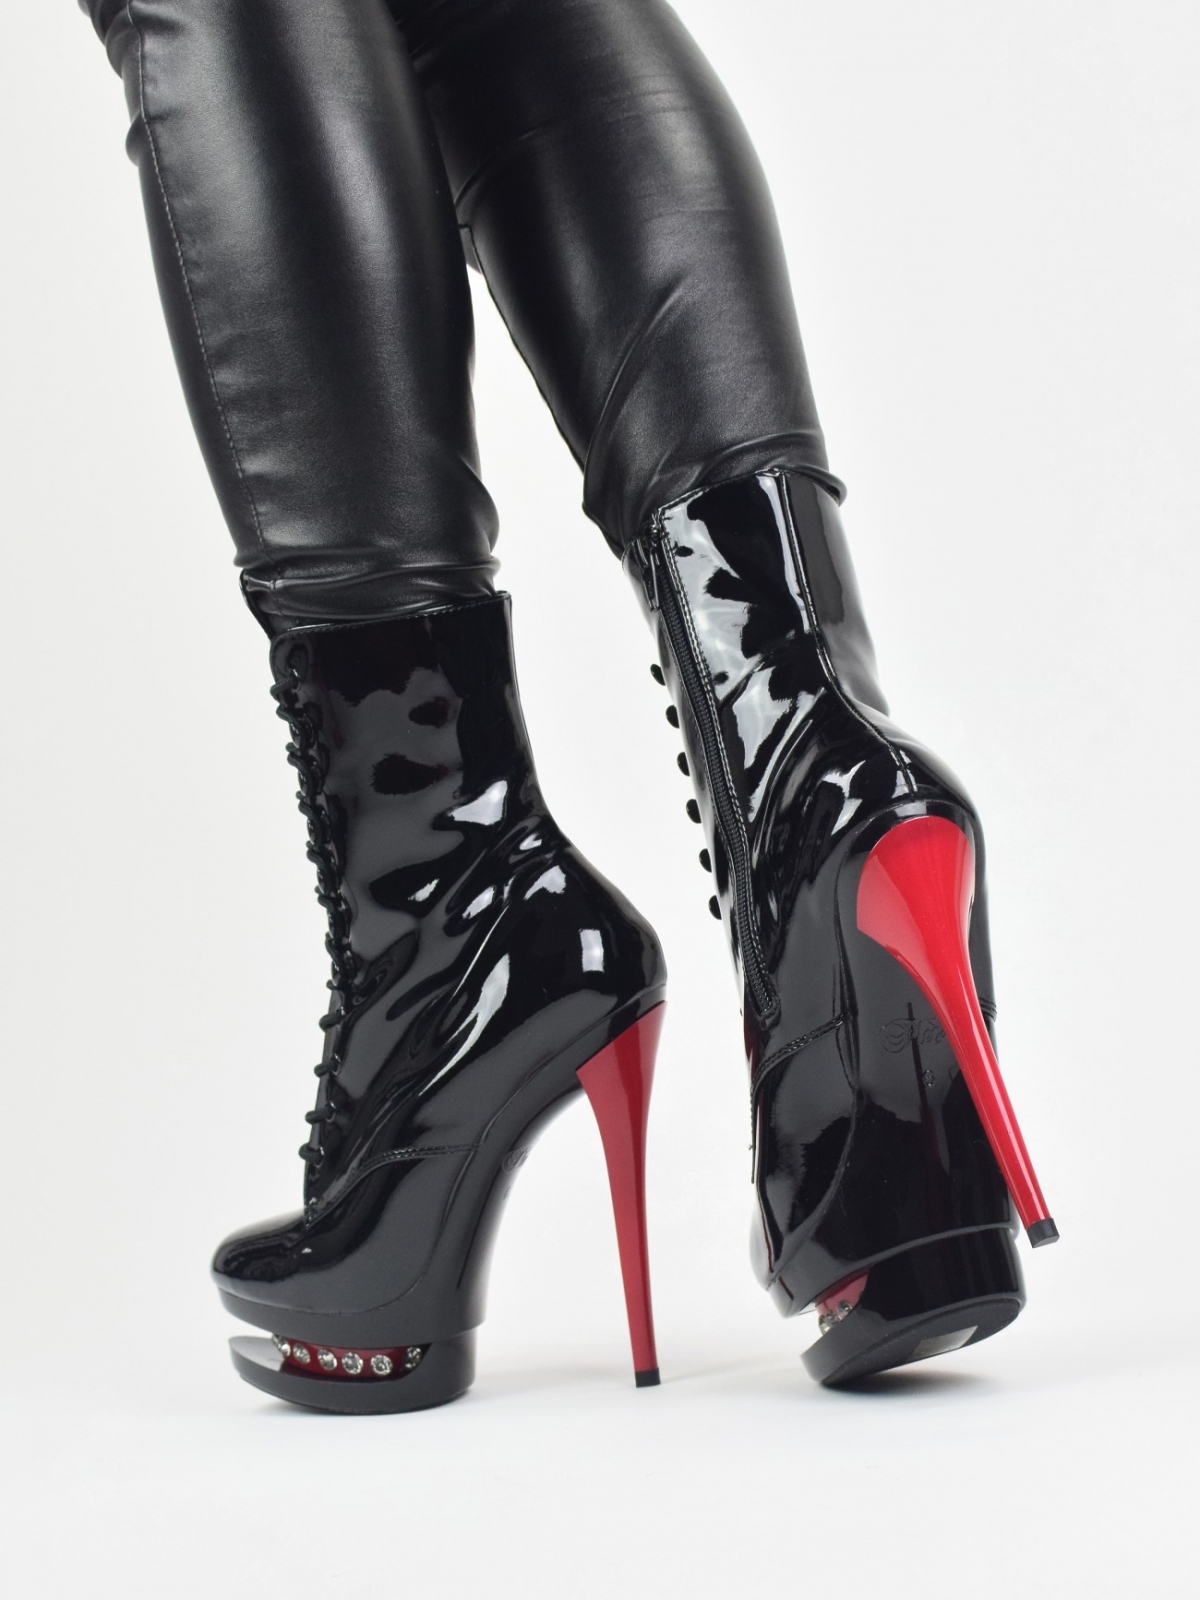 Pleaser Blondie R 1020 ankle boots with rhinestone accents in black & red